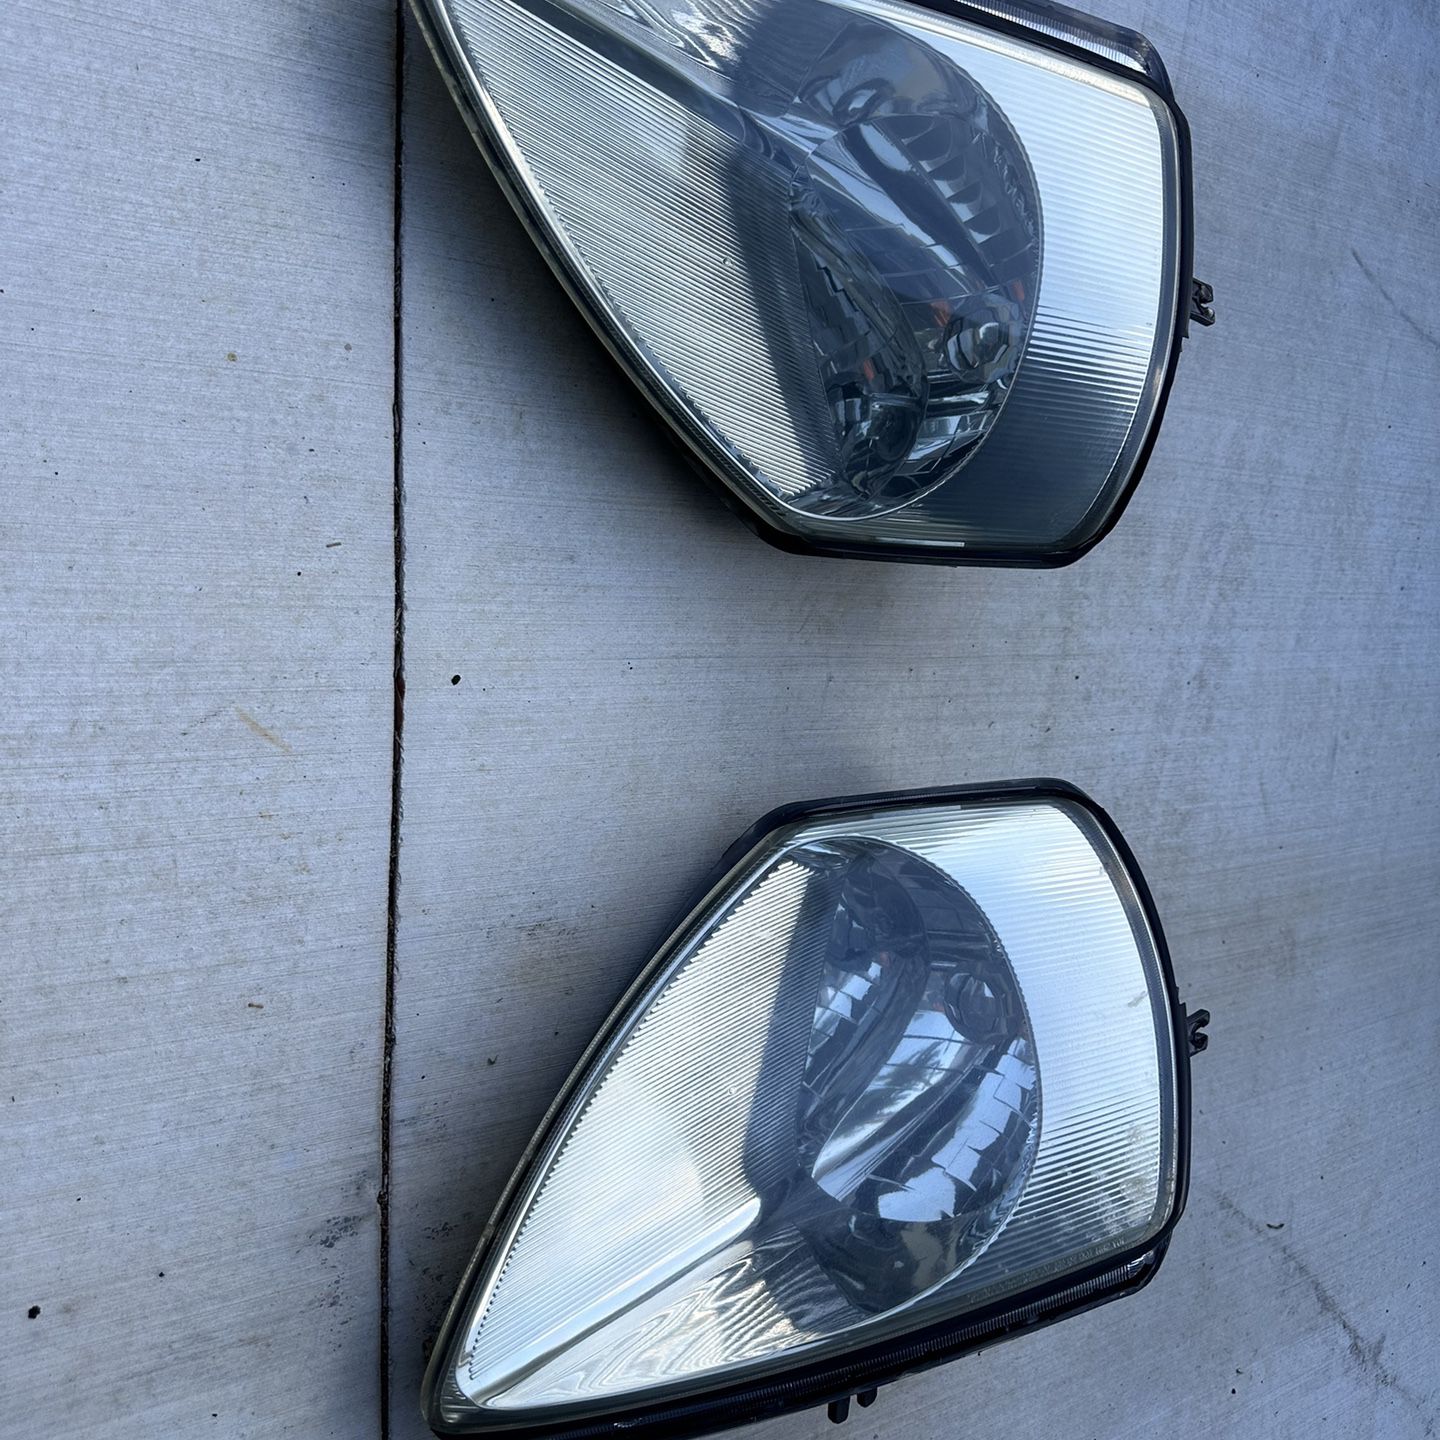 Used Headlights For A 2003 Mitsubishi Eclipse Spider